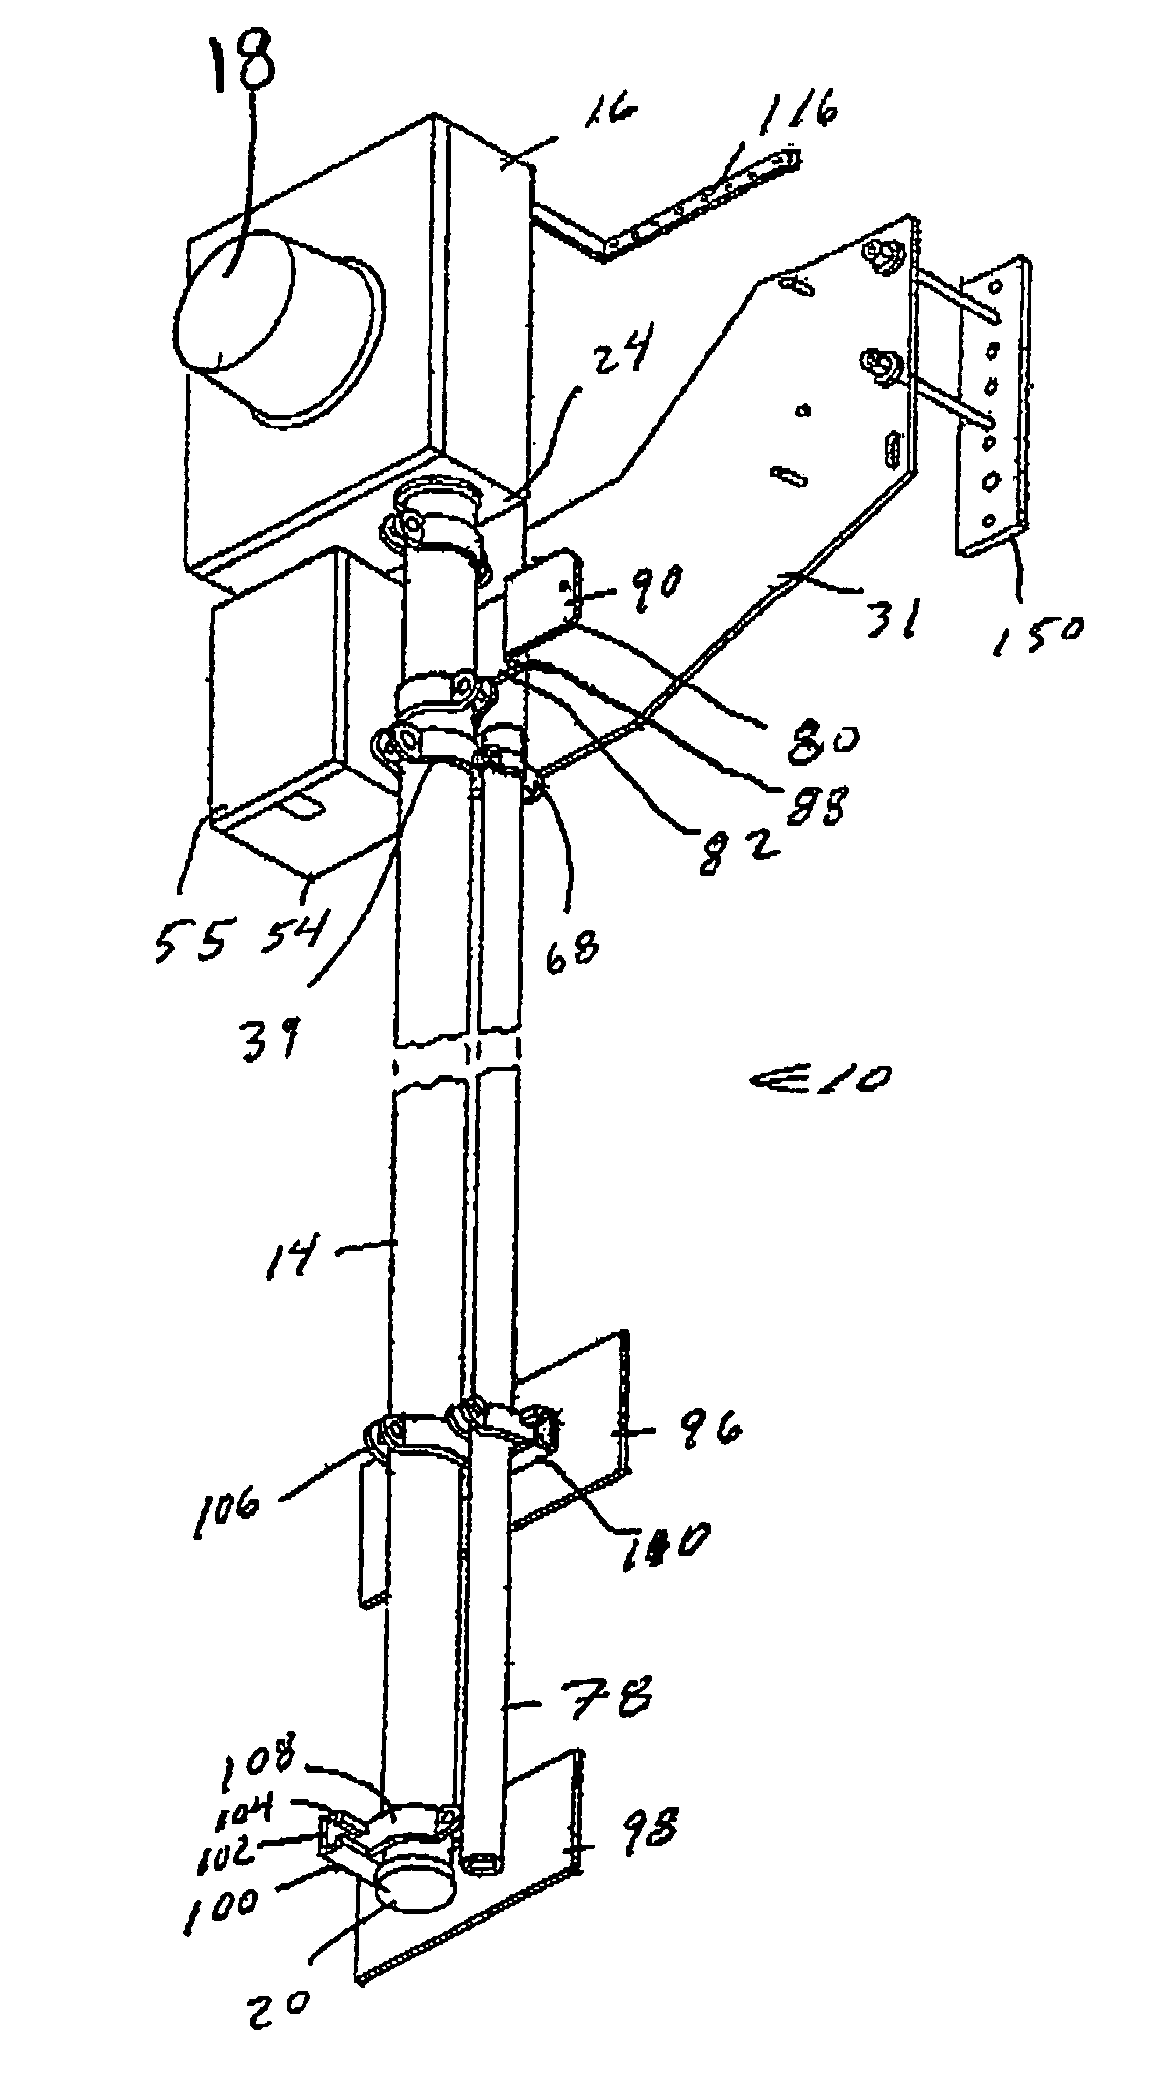 Preconstruction multiple utility meter pedestal and method of installation